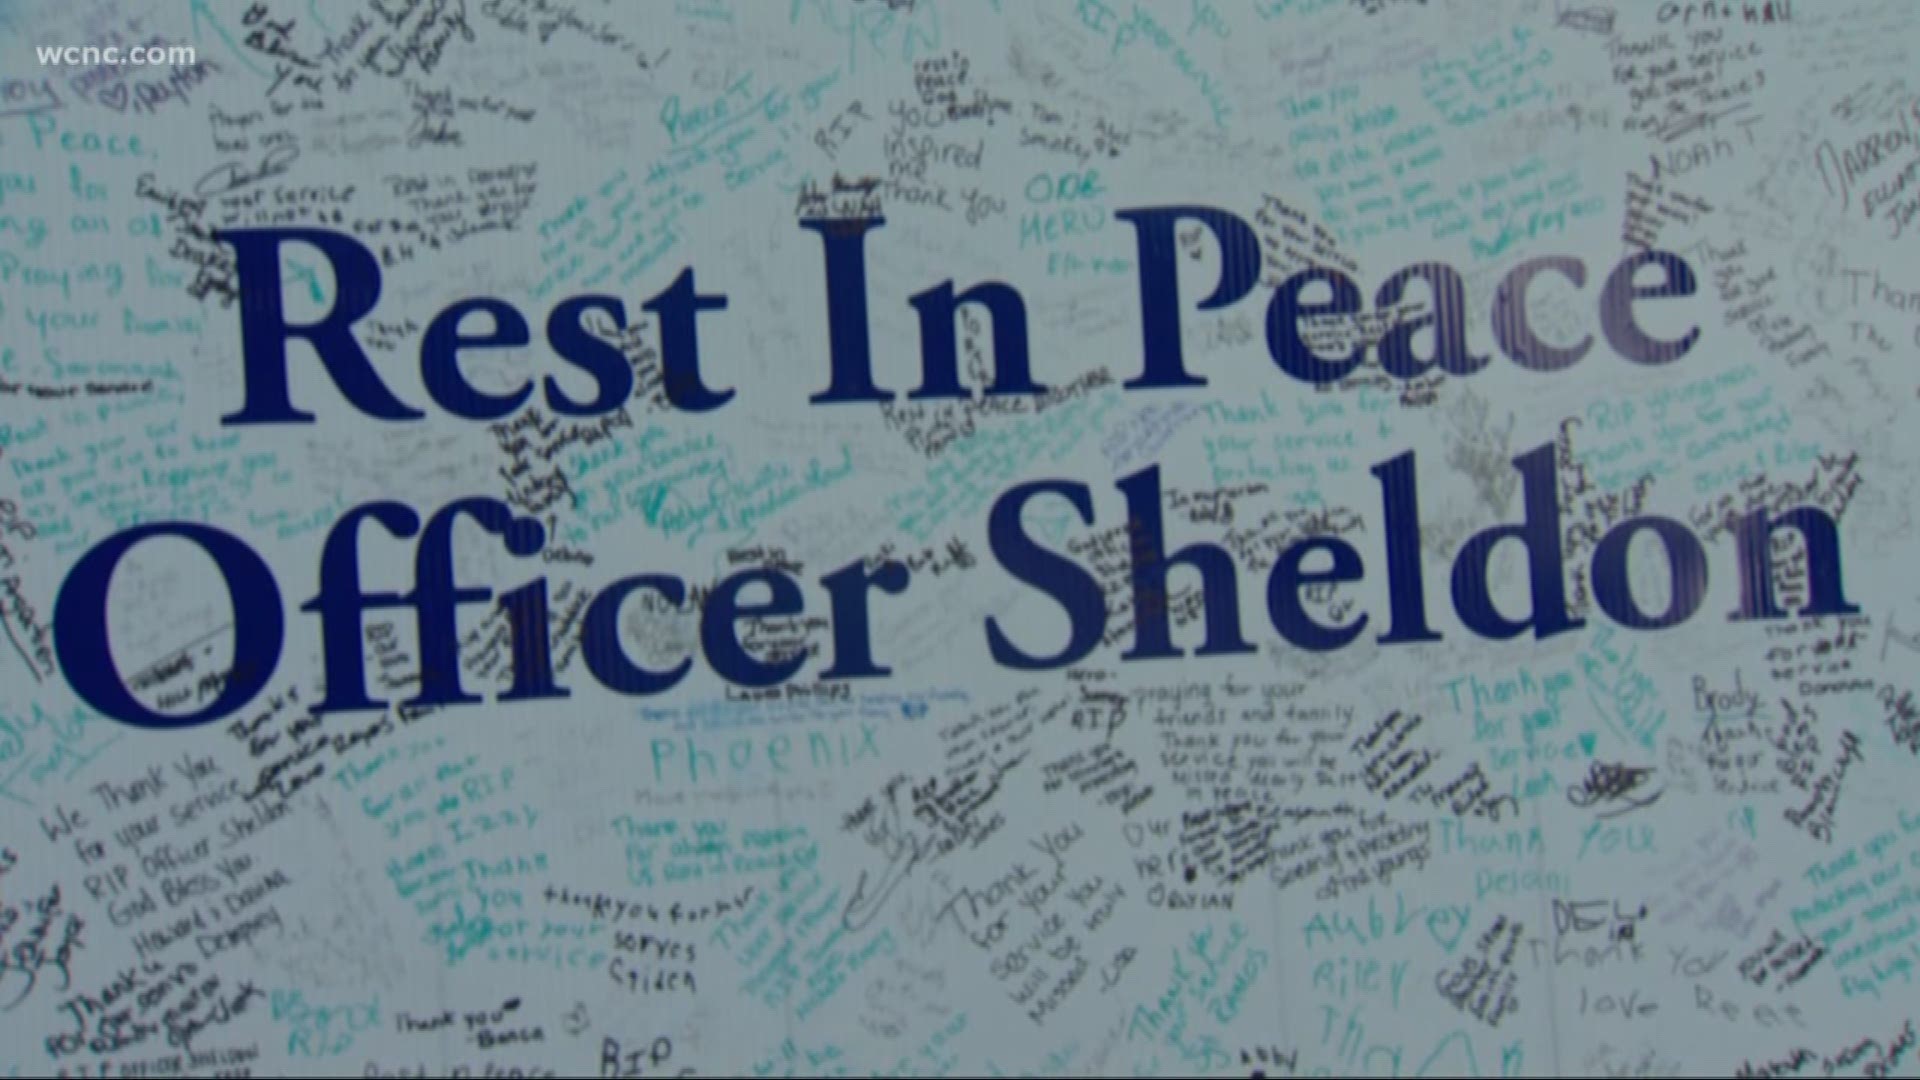 A Mooresville officer, 32-year-old Jordan Sheldon, was killed in the line of duty Saturday evening. Mooresville officers took a moment before, during and after their shifts to see what people wrote and left behind at his memorial.